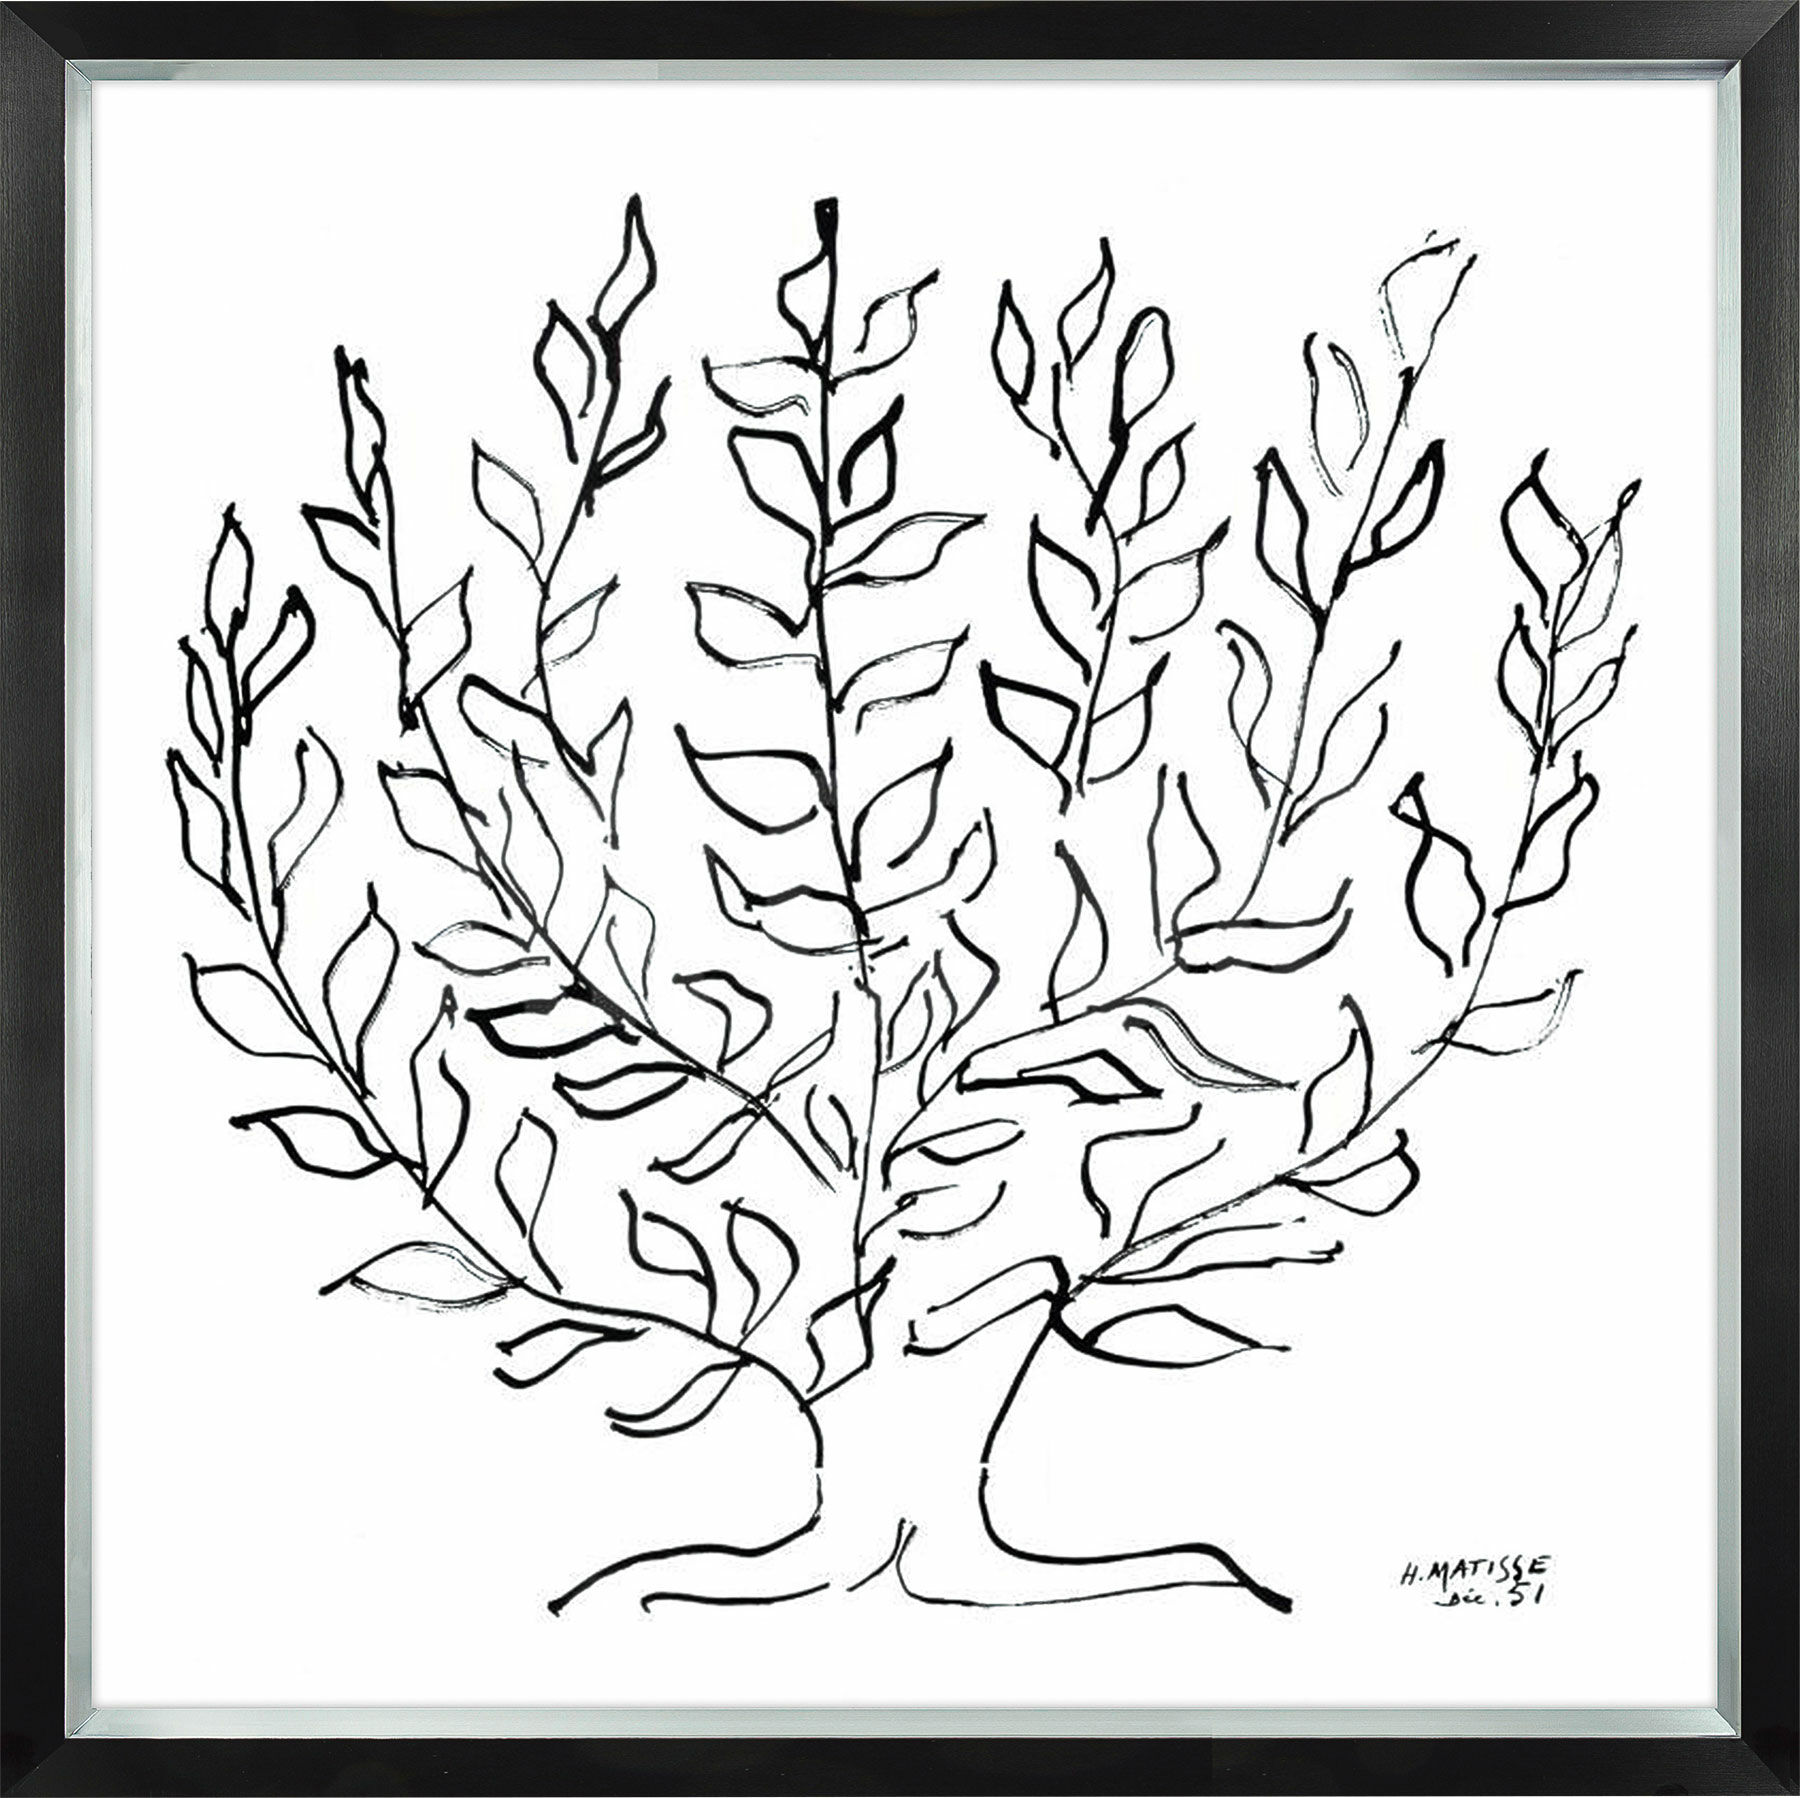 Picture "Le Plantane" (1951), framed by Henri Matisse